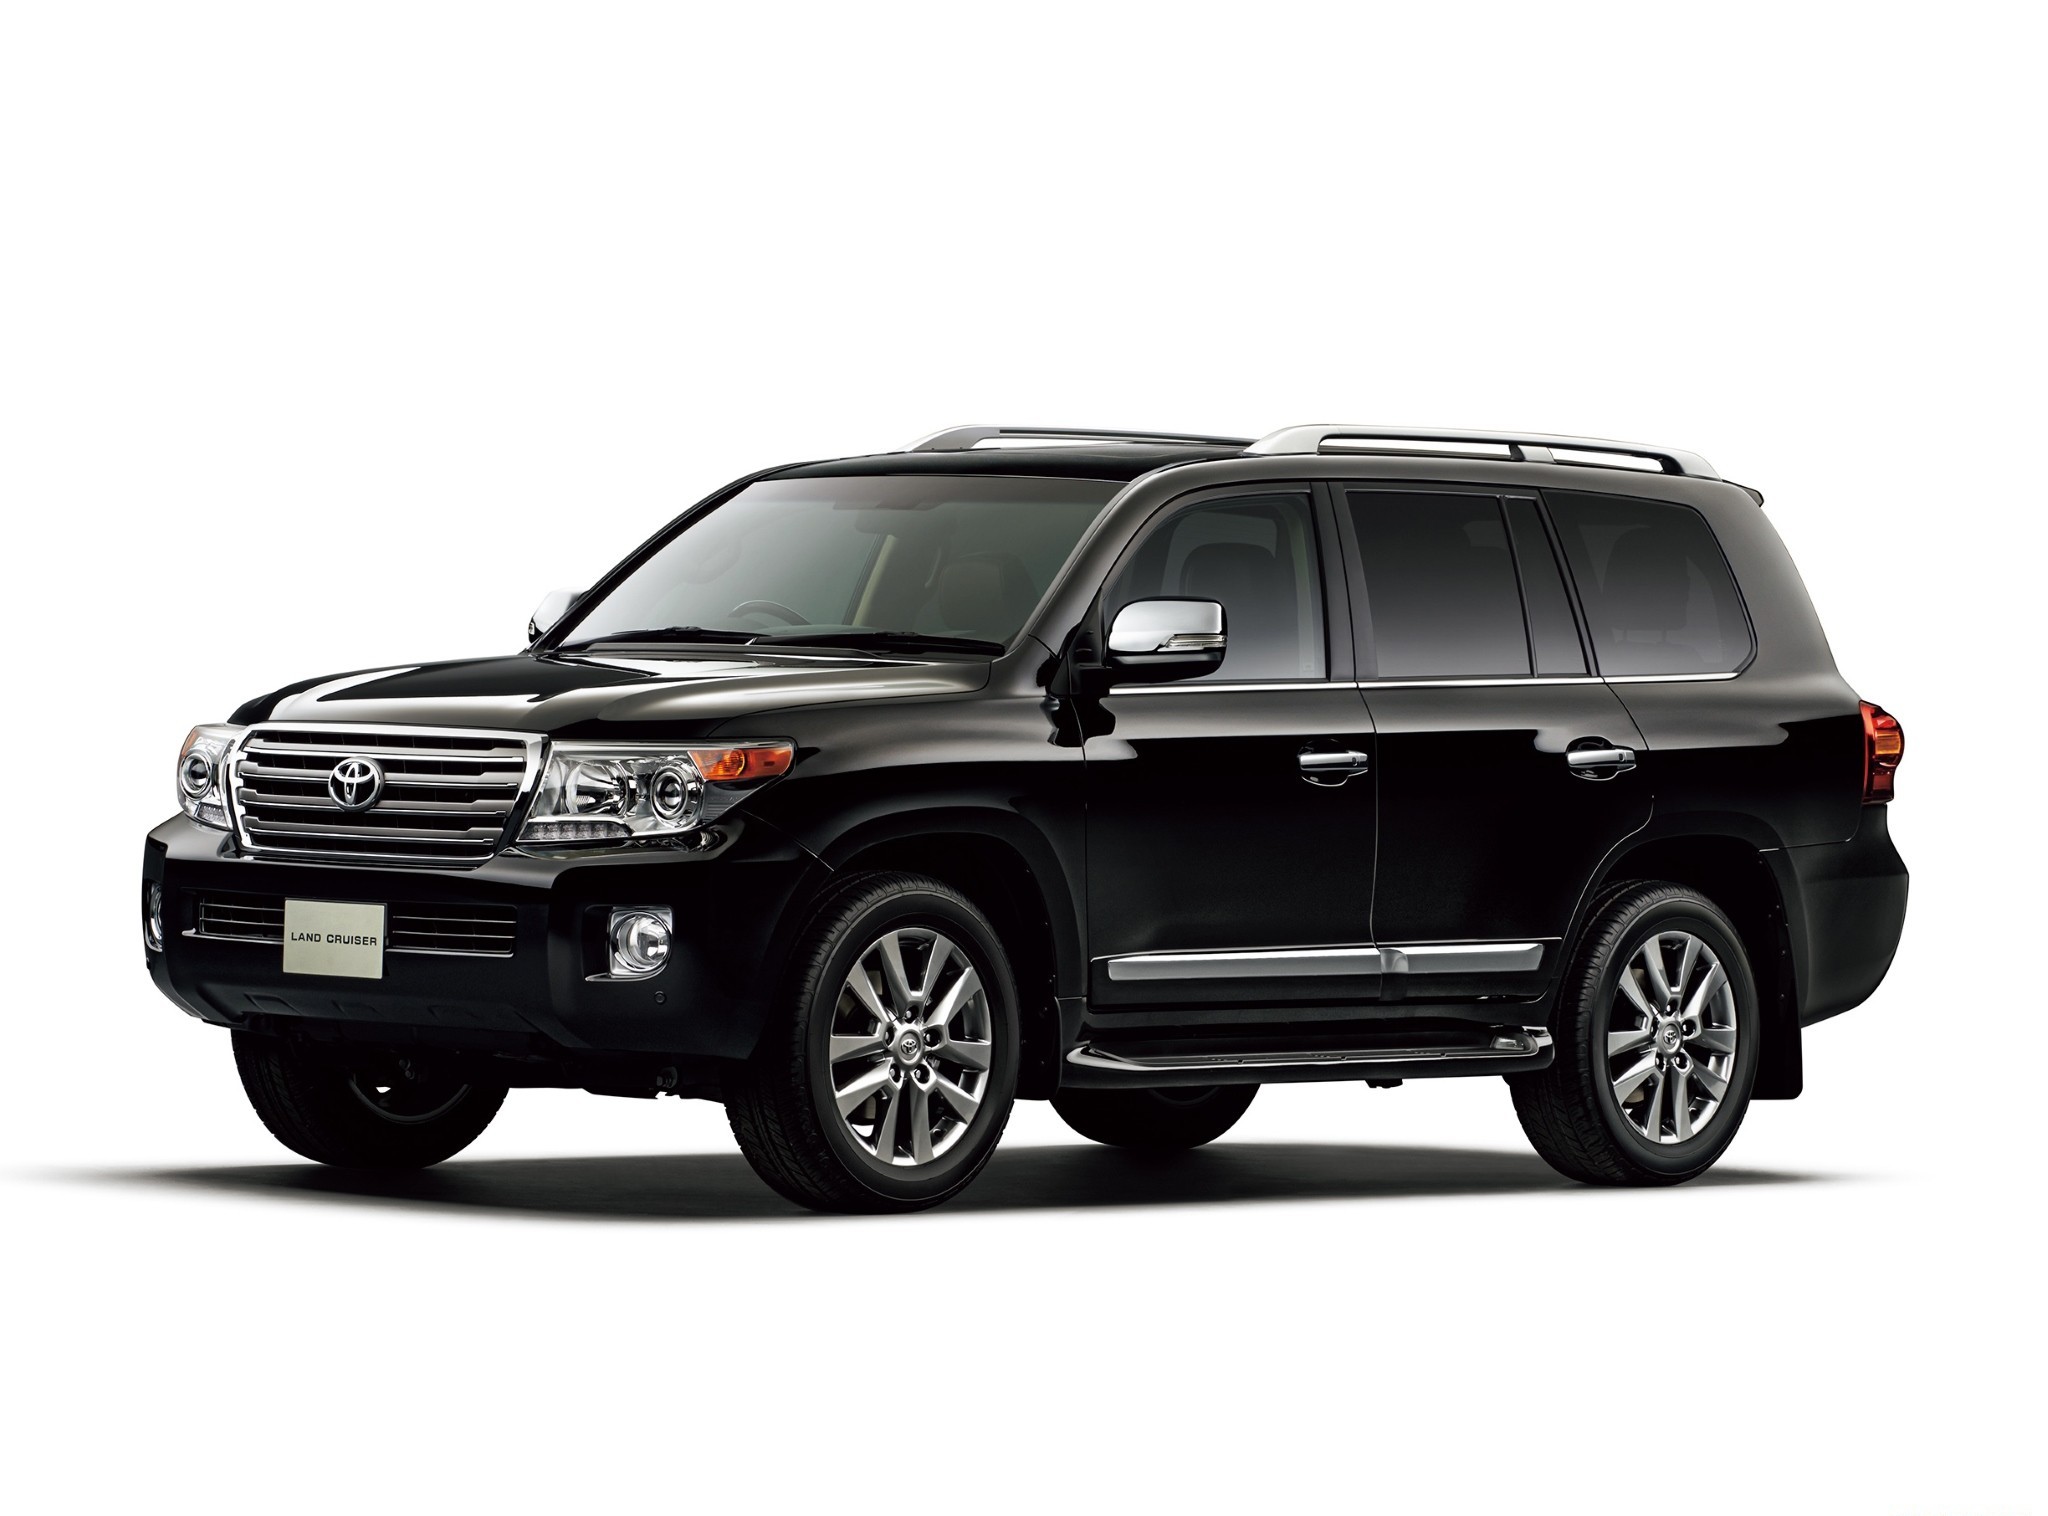 Toyota Land Cruiser Full HD Wallpaper And Background